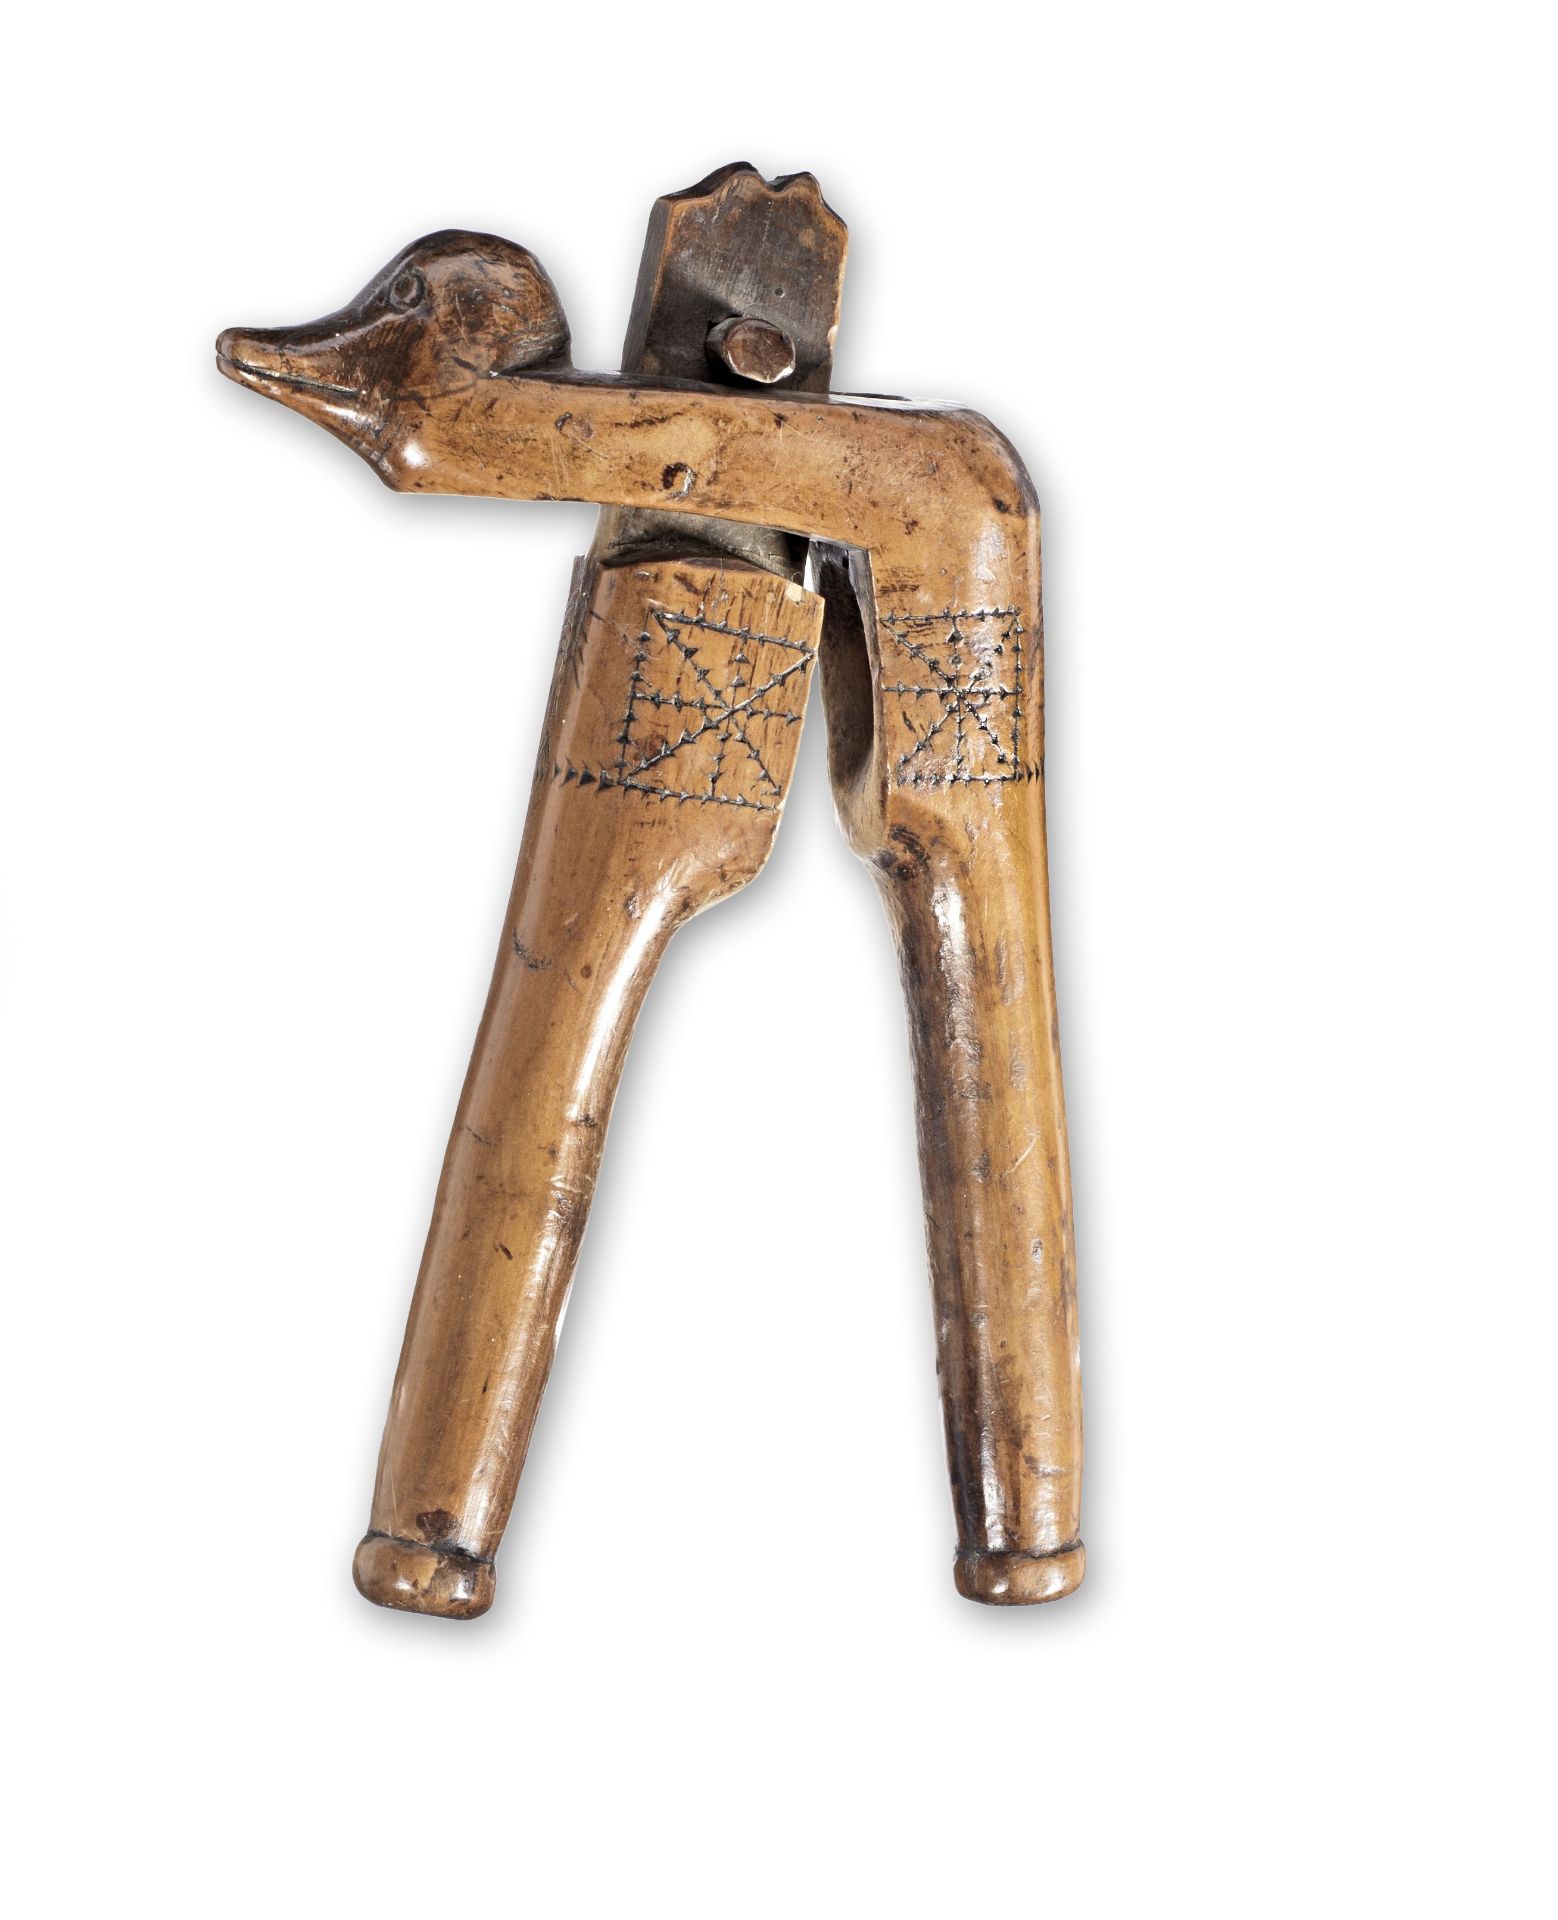 An early to mid-18th century boxwood lever-action nutcracker, circa 1720-50